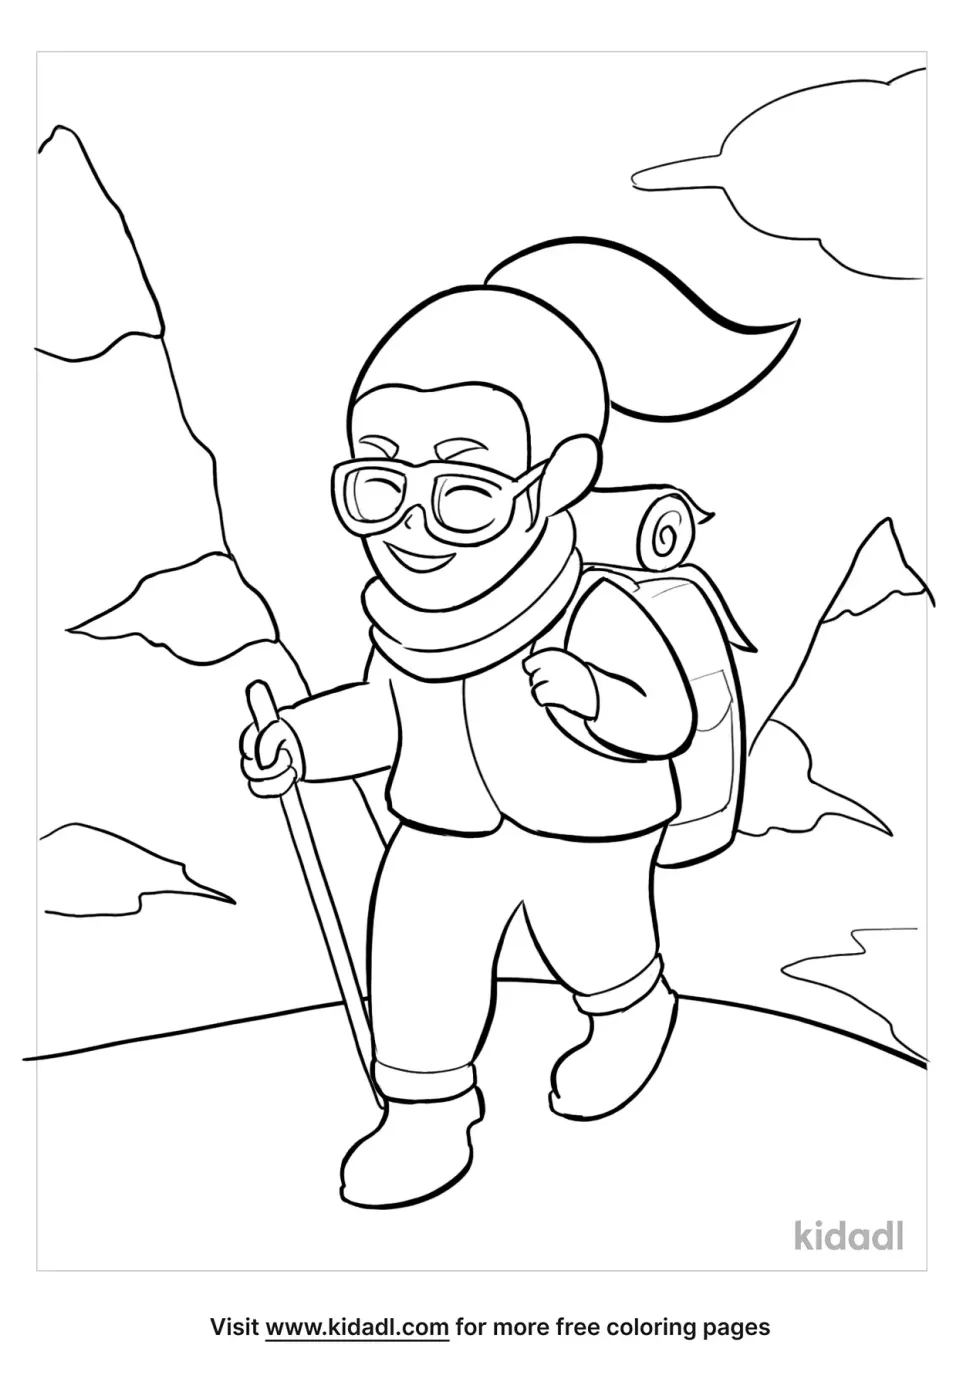 Adventure Girl Coloring Page